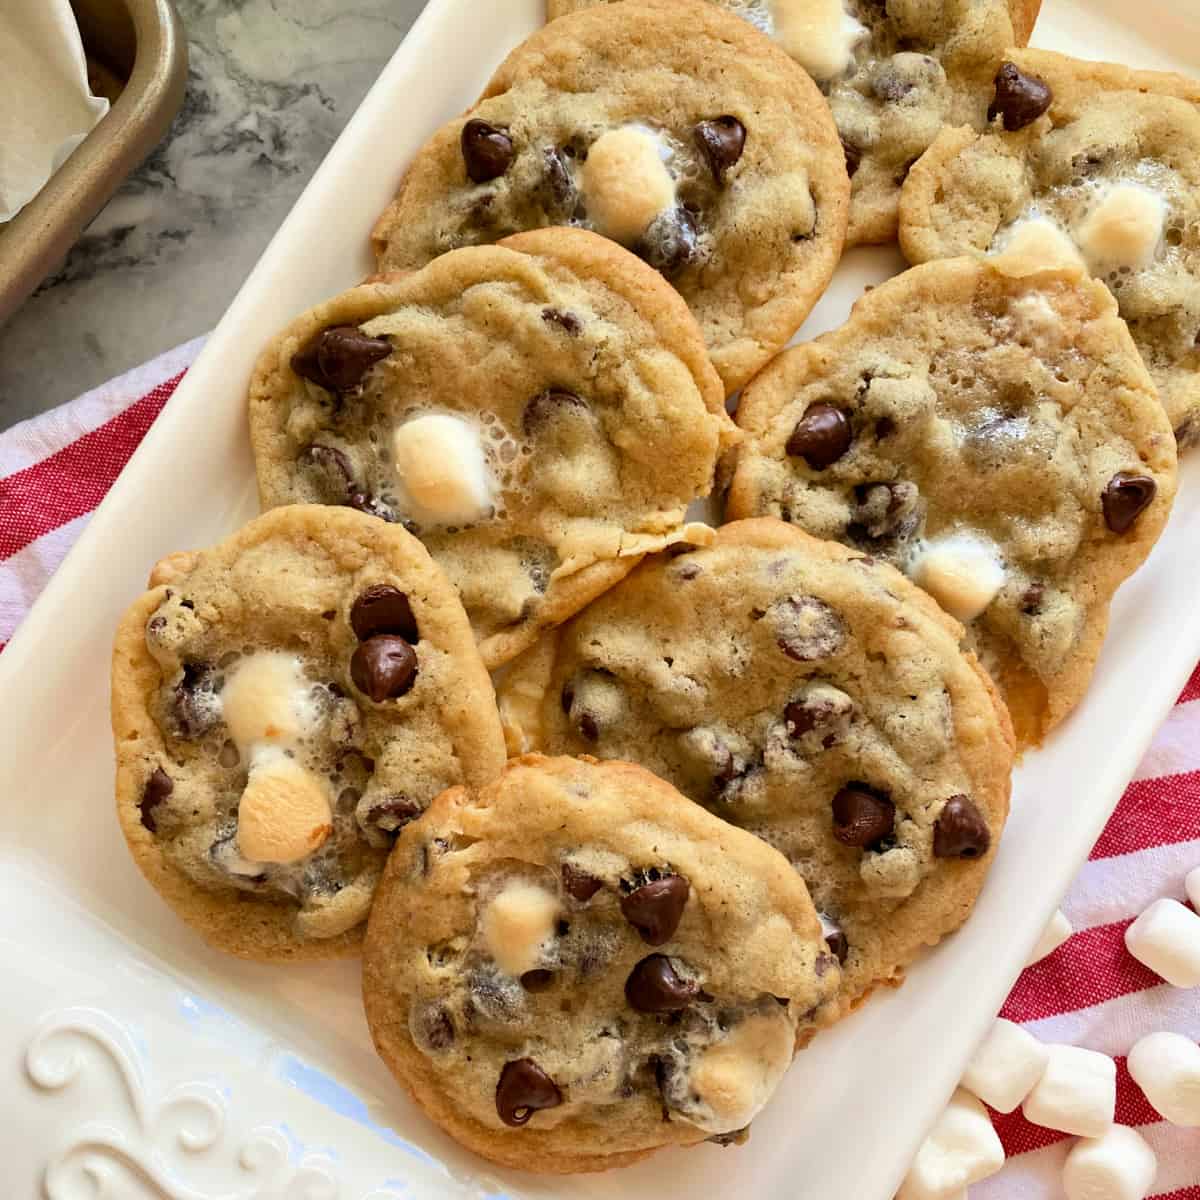 https://www.katiescucina.com/wp-content/uploads/2022/12/Chocolate-Chip-Marshmallow-Cookies-square.jpg